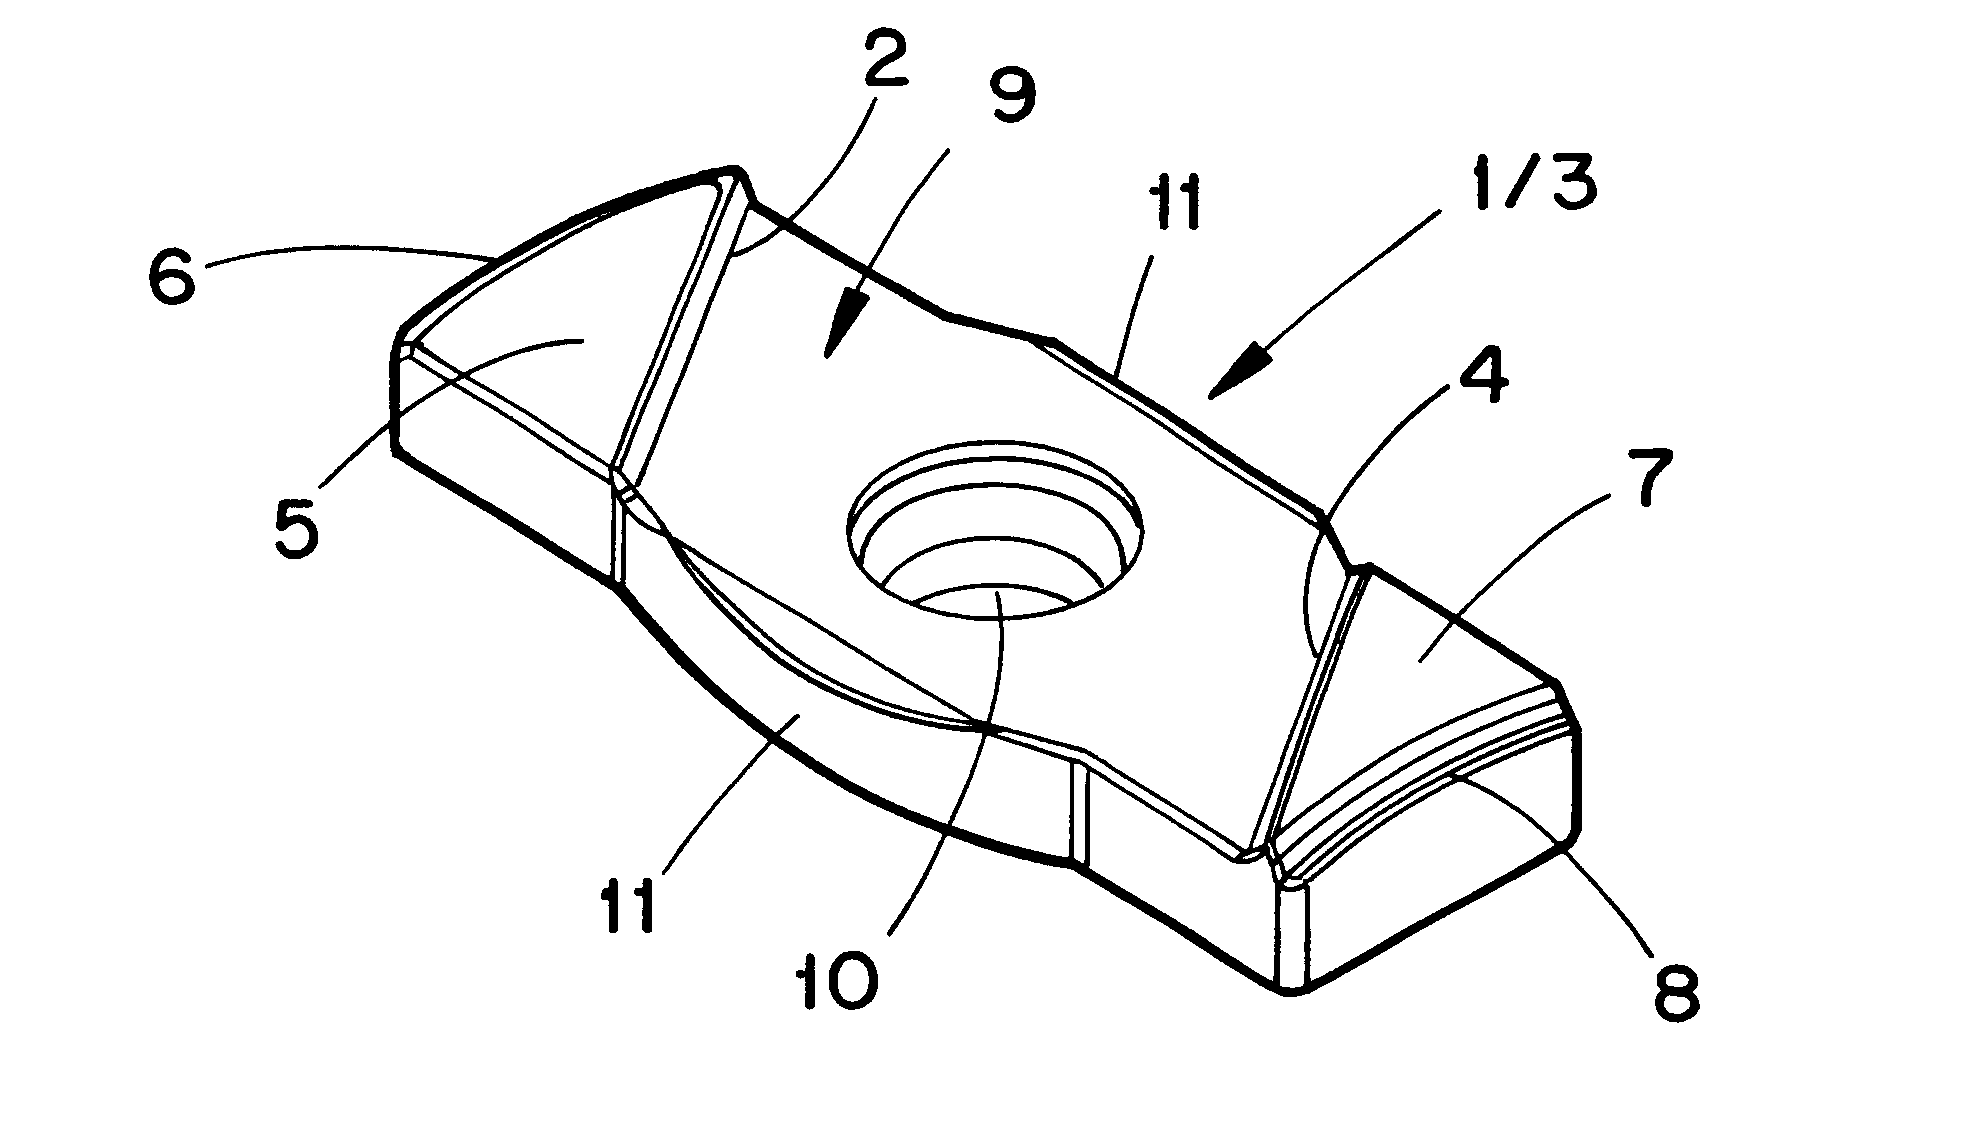 Support pad for a deep hole drill